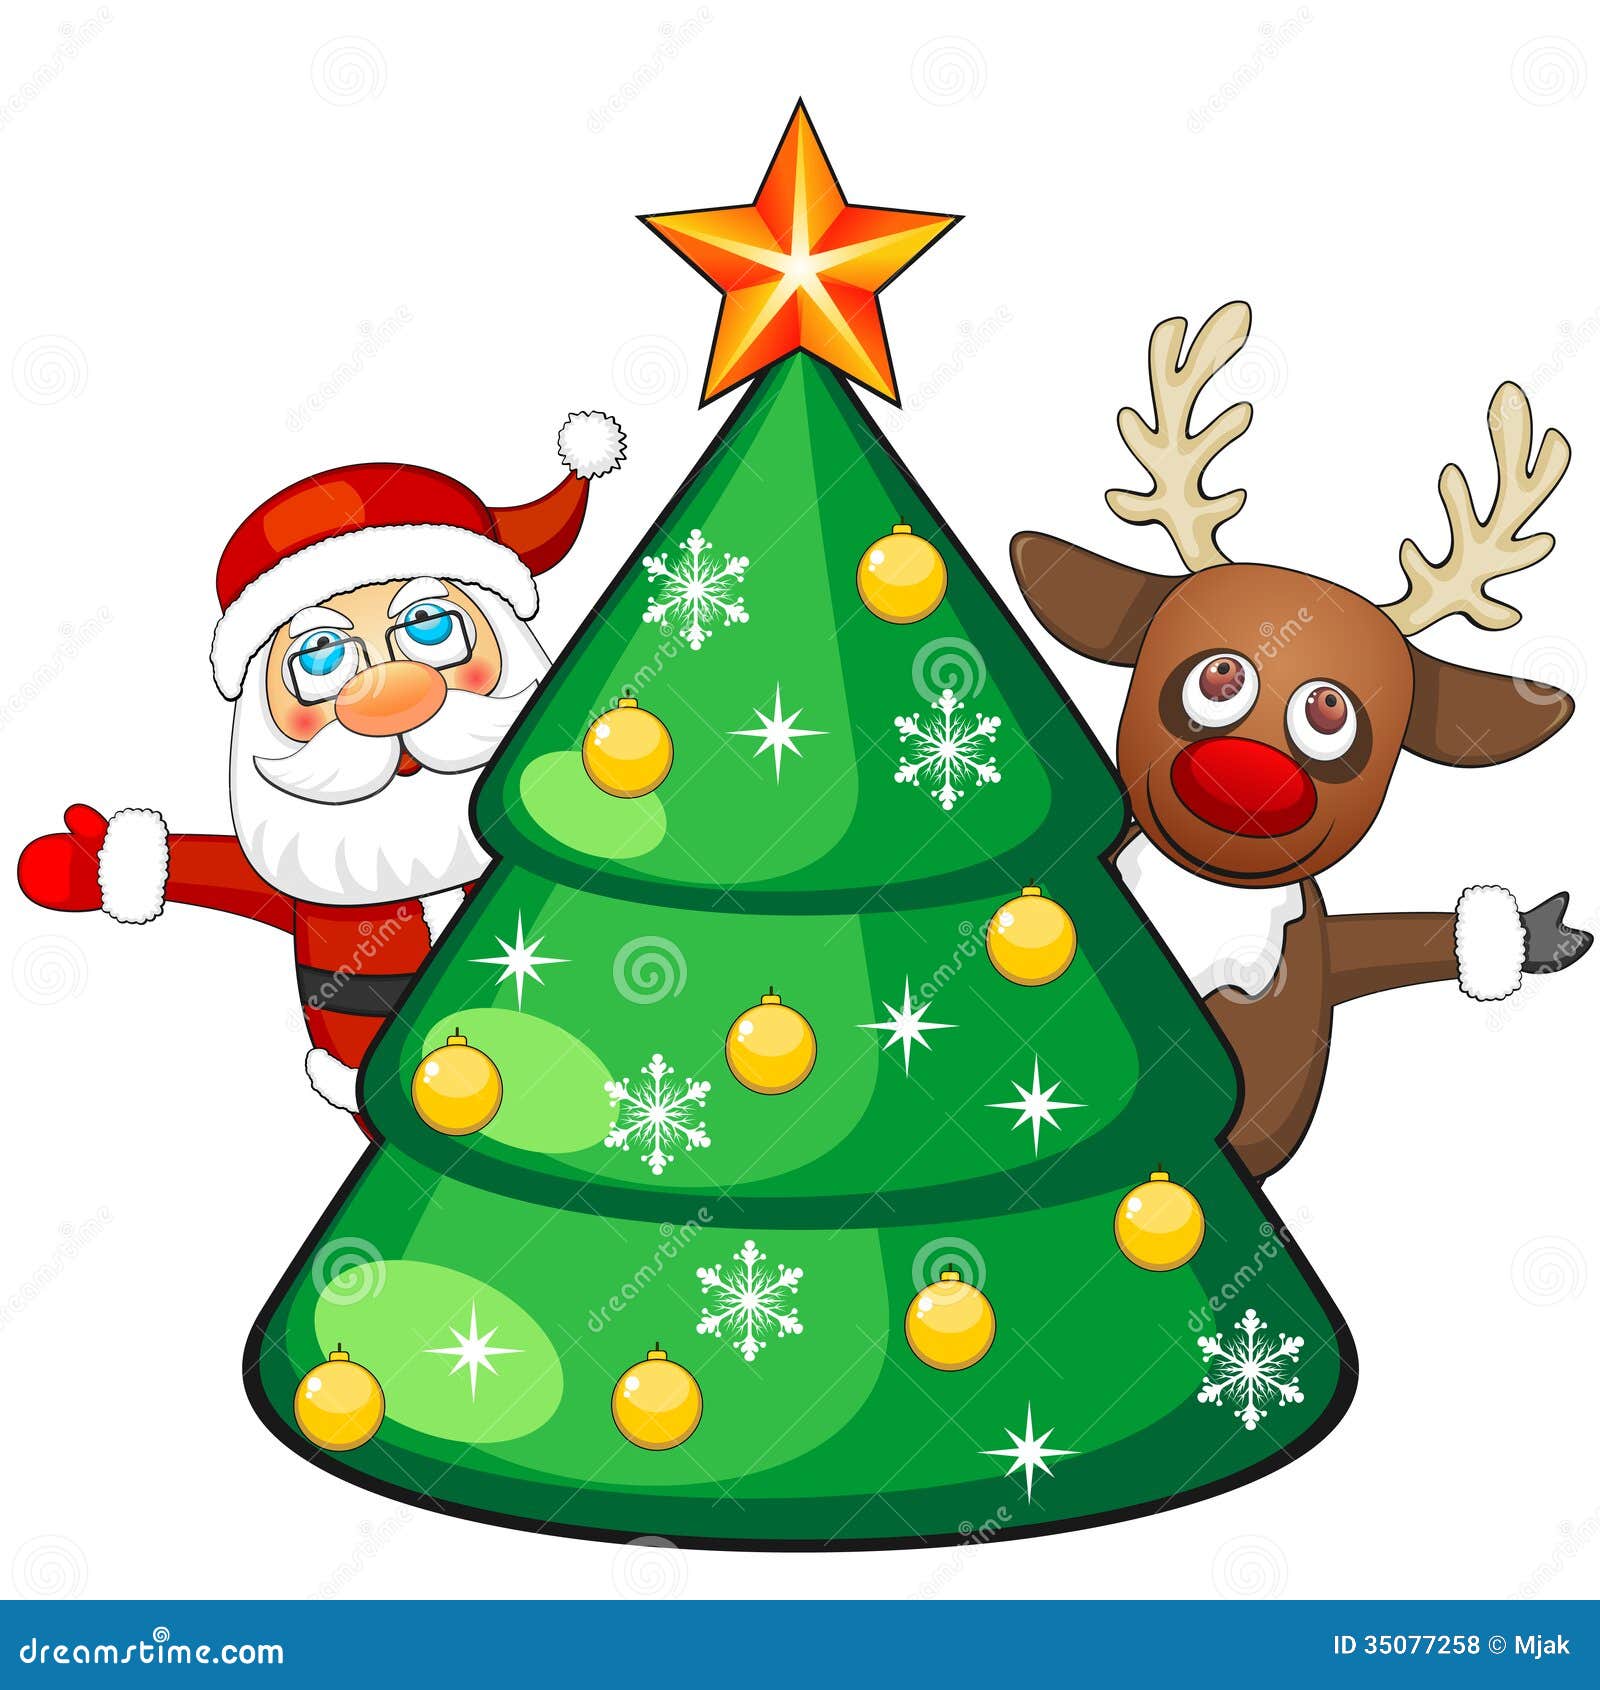 Deer and Santa Claus with Christmas Tree Stock Vector - Illustration of  isolated, icon: 35077258